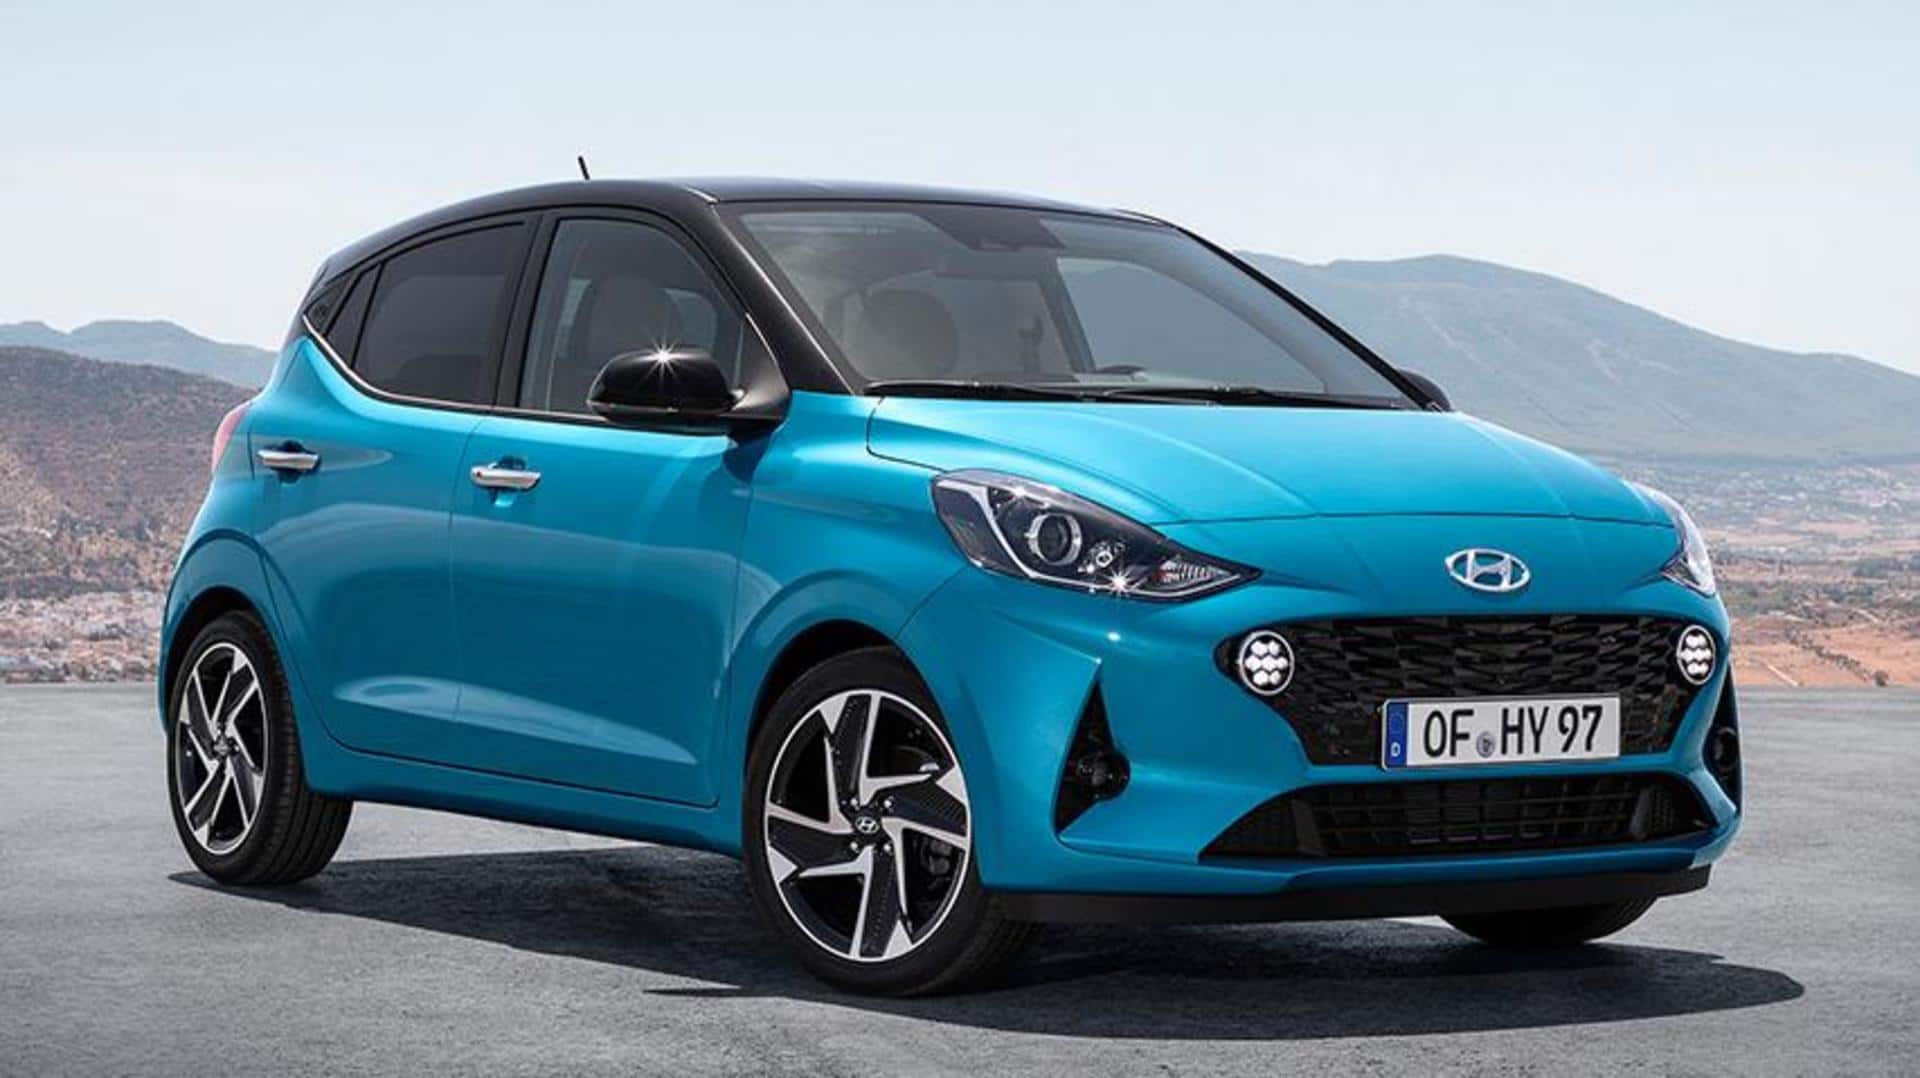 2024 Hyundai i10 hatchback spotted testing: What to expect?